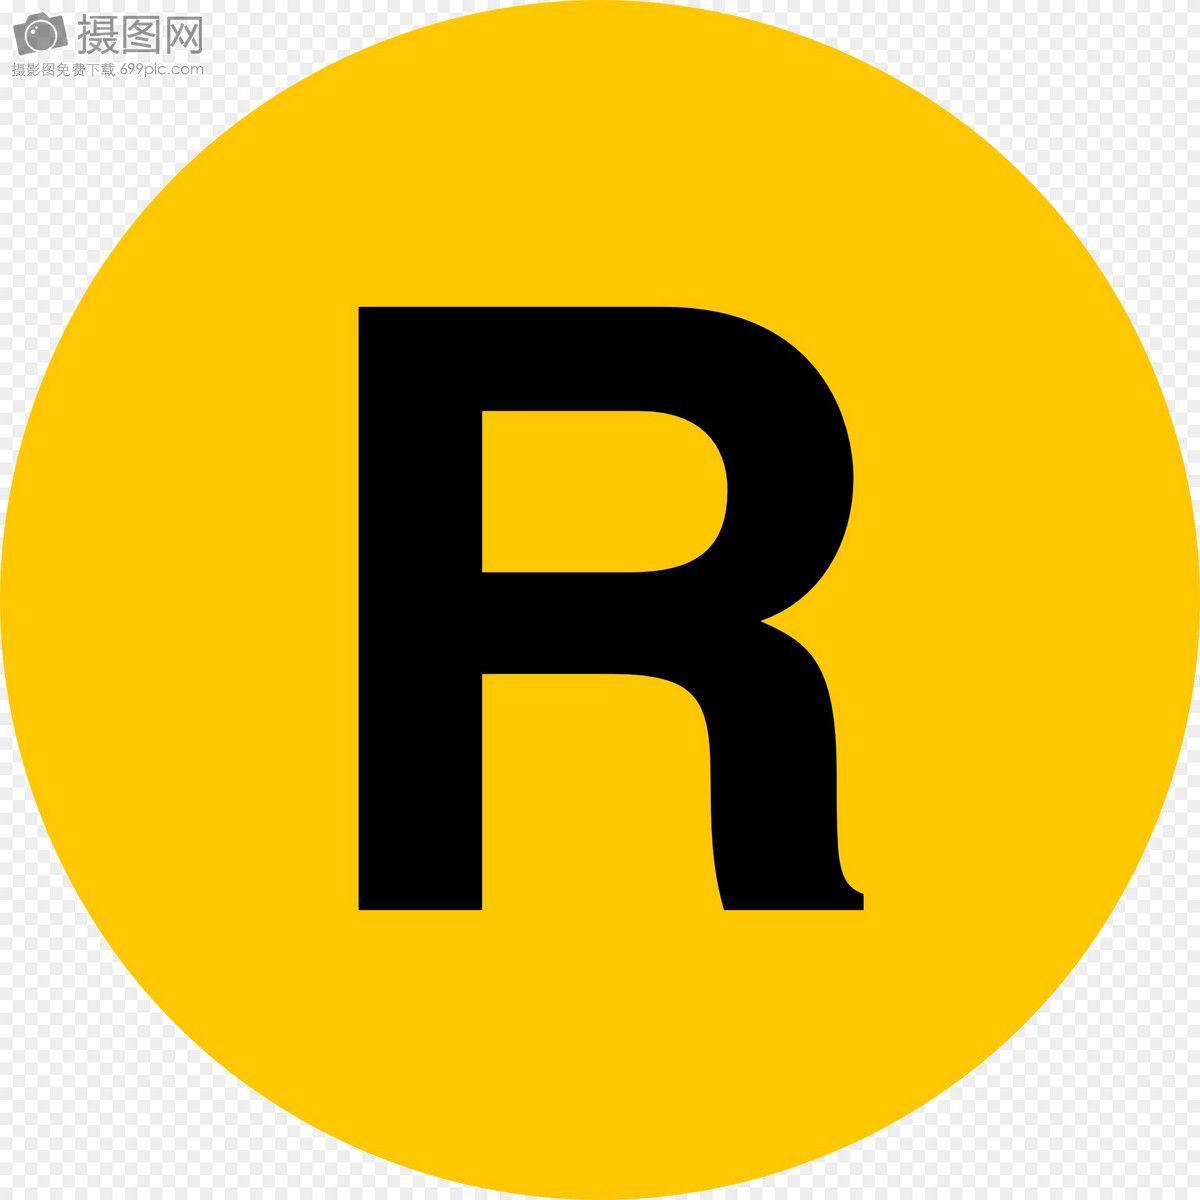 Black and Yellow Round Logo - Yellow round black r graphics image_picture free download